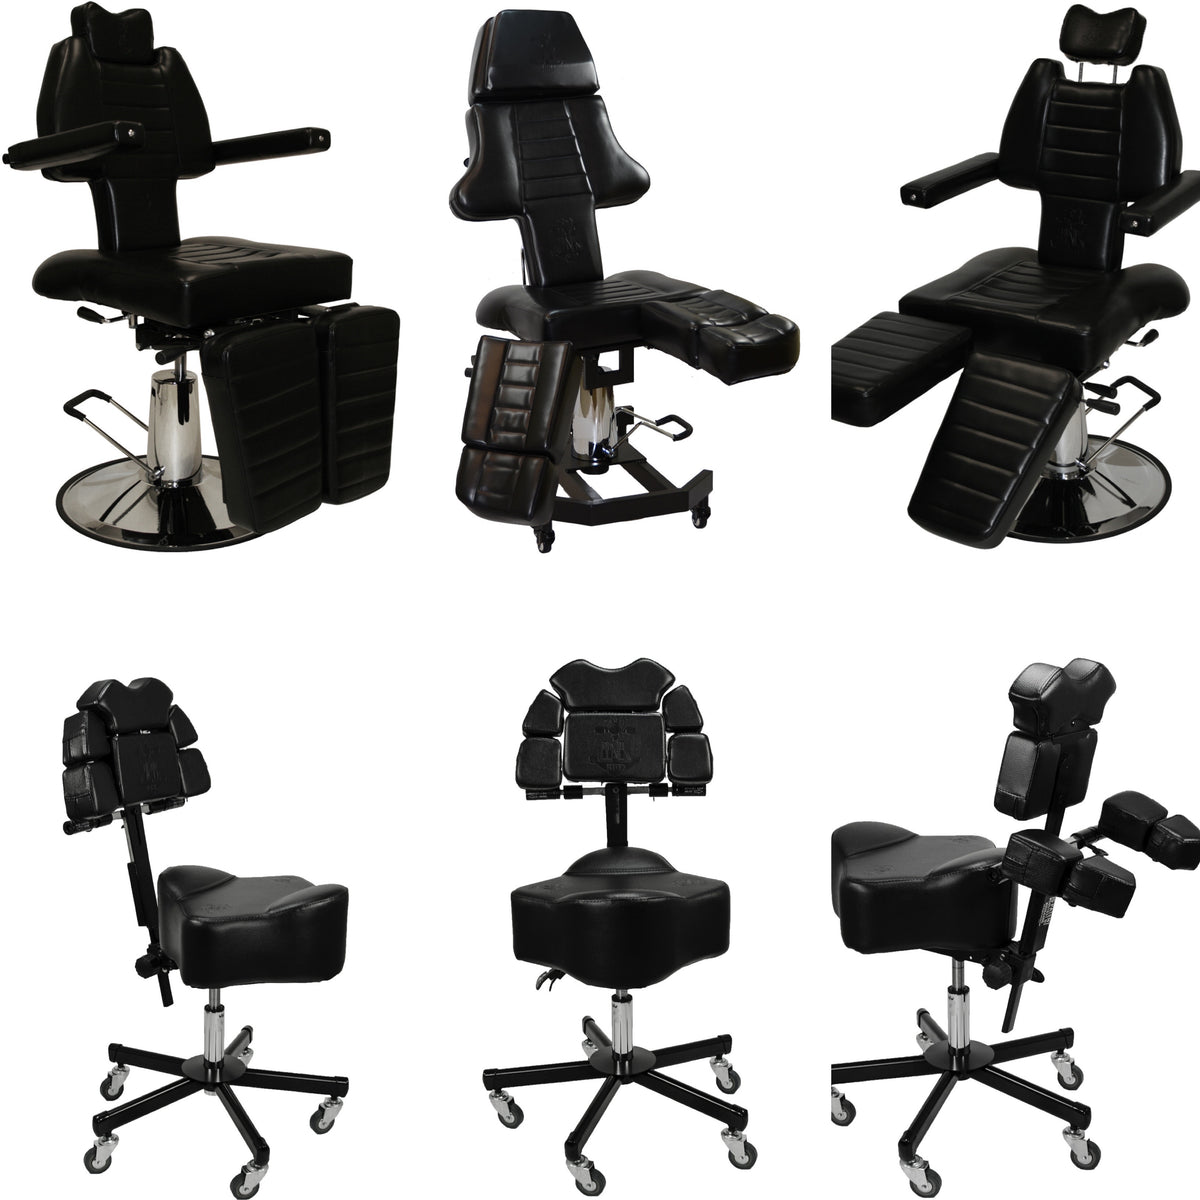 Share more than 165 hydraulic tattoo chair best